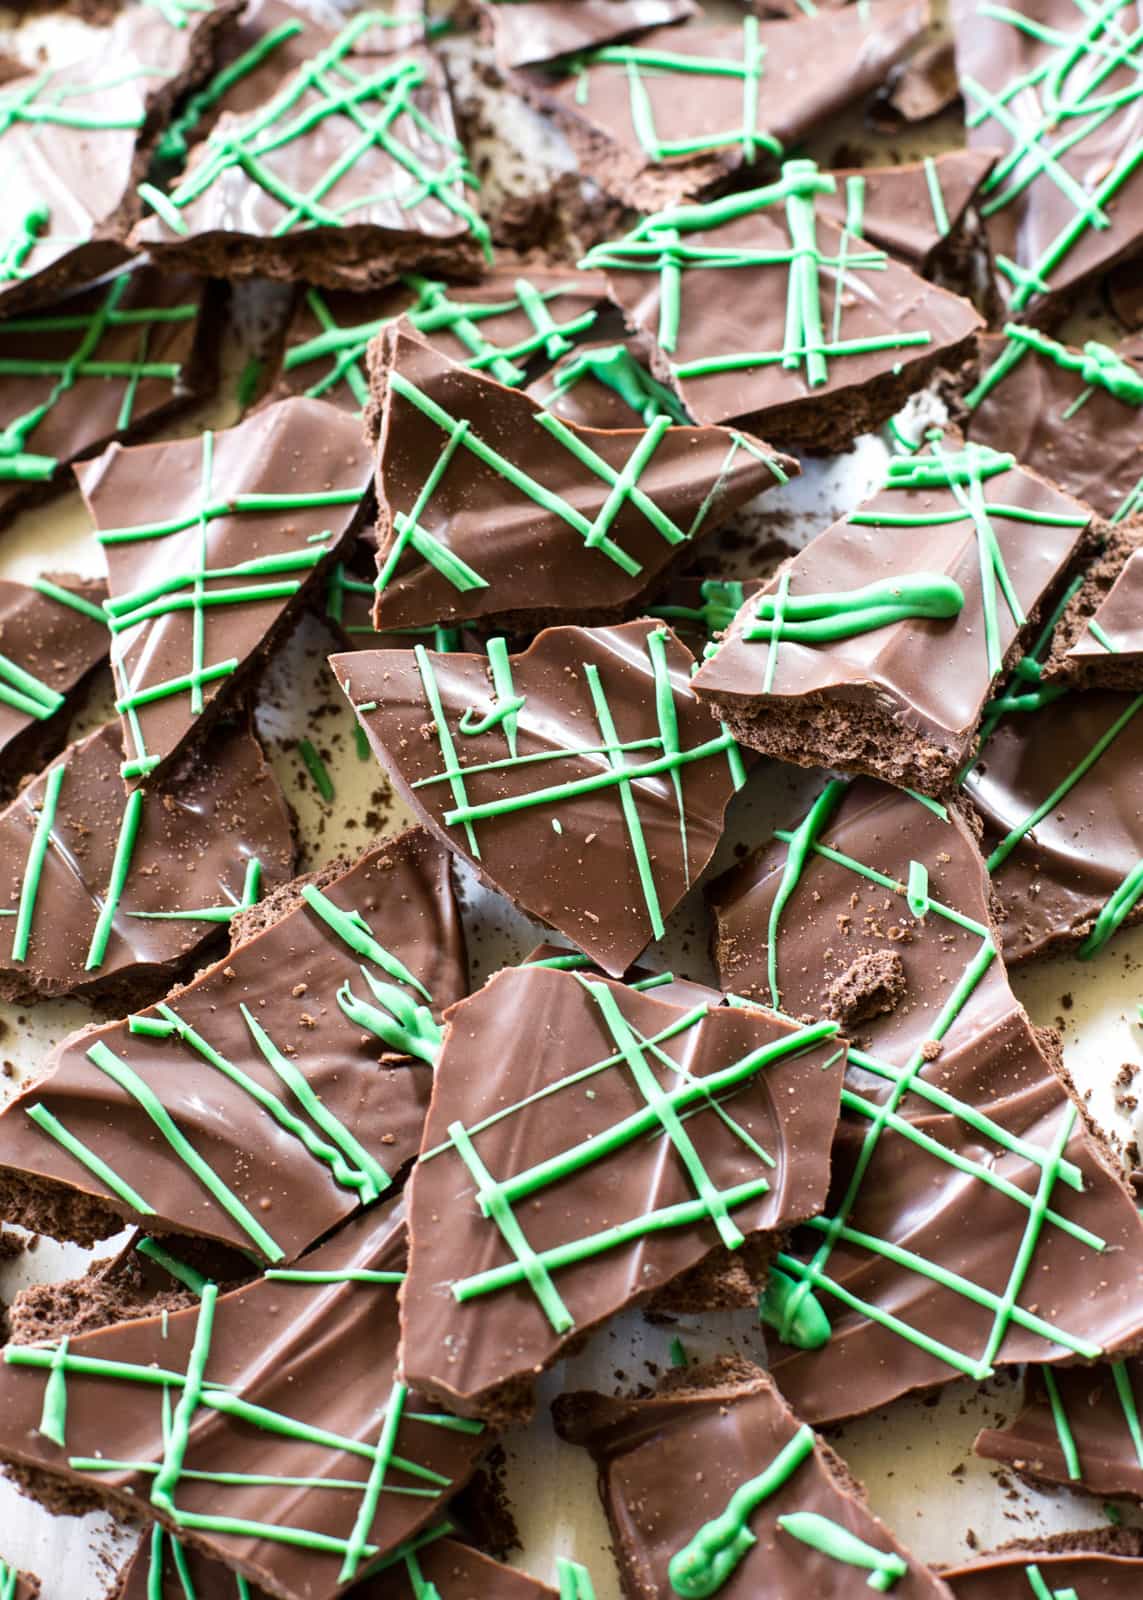 This Chocolate Mint Bark tastes just like your favorite cookie but can be made in your own kitchen! the-girl-who-ate-everything.com